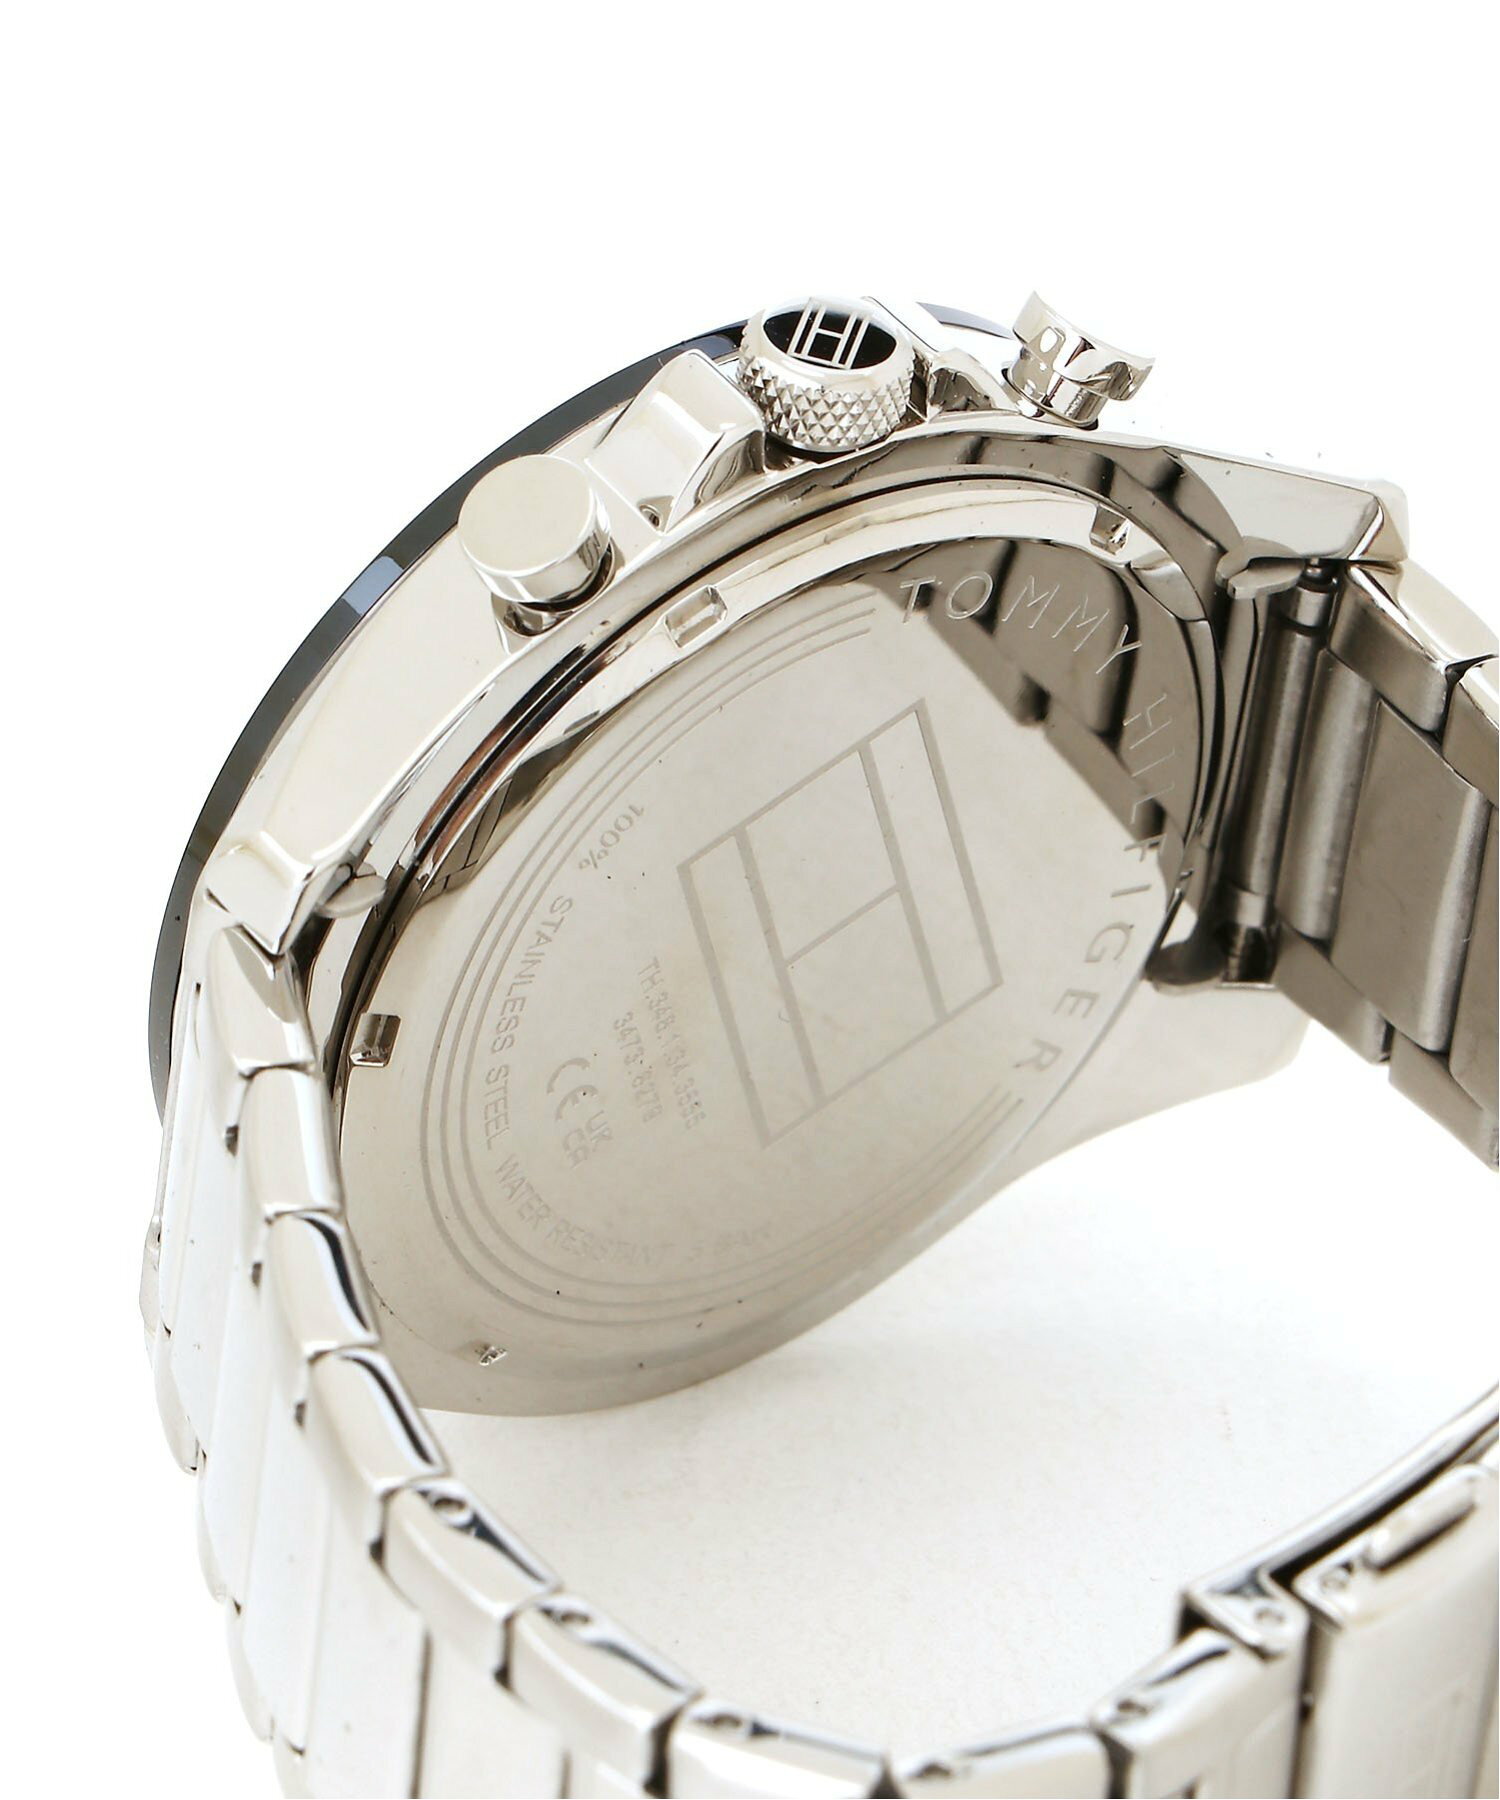 TOMMY HILFIGER(トミーヒルフィガー) Sport Watch with Stainless Steel Bracelet